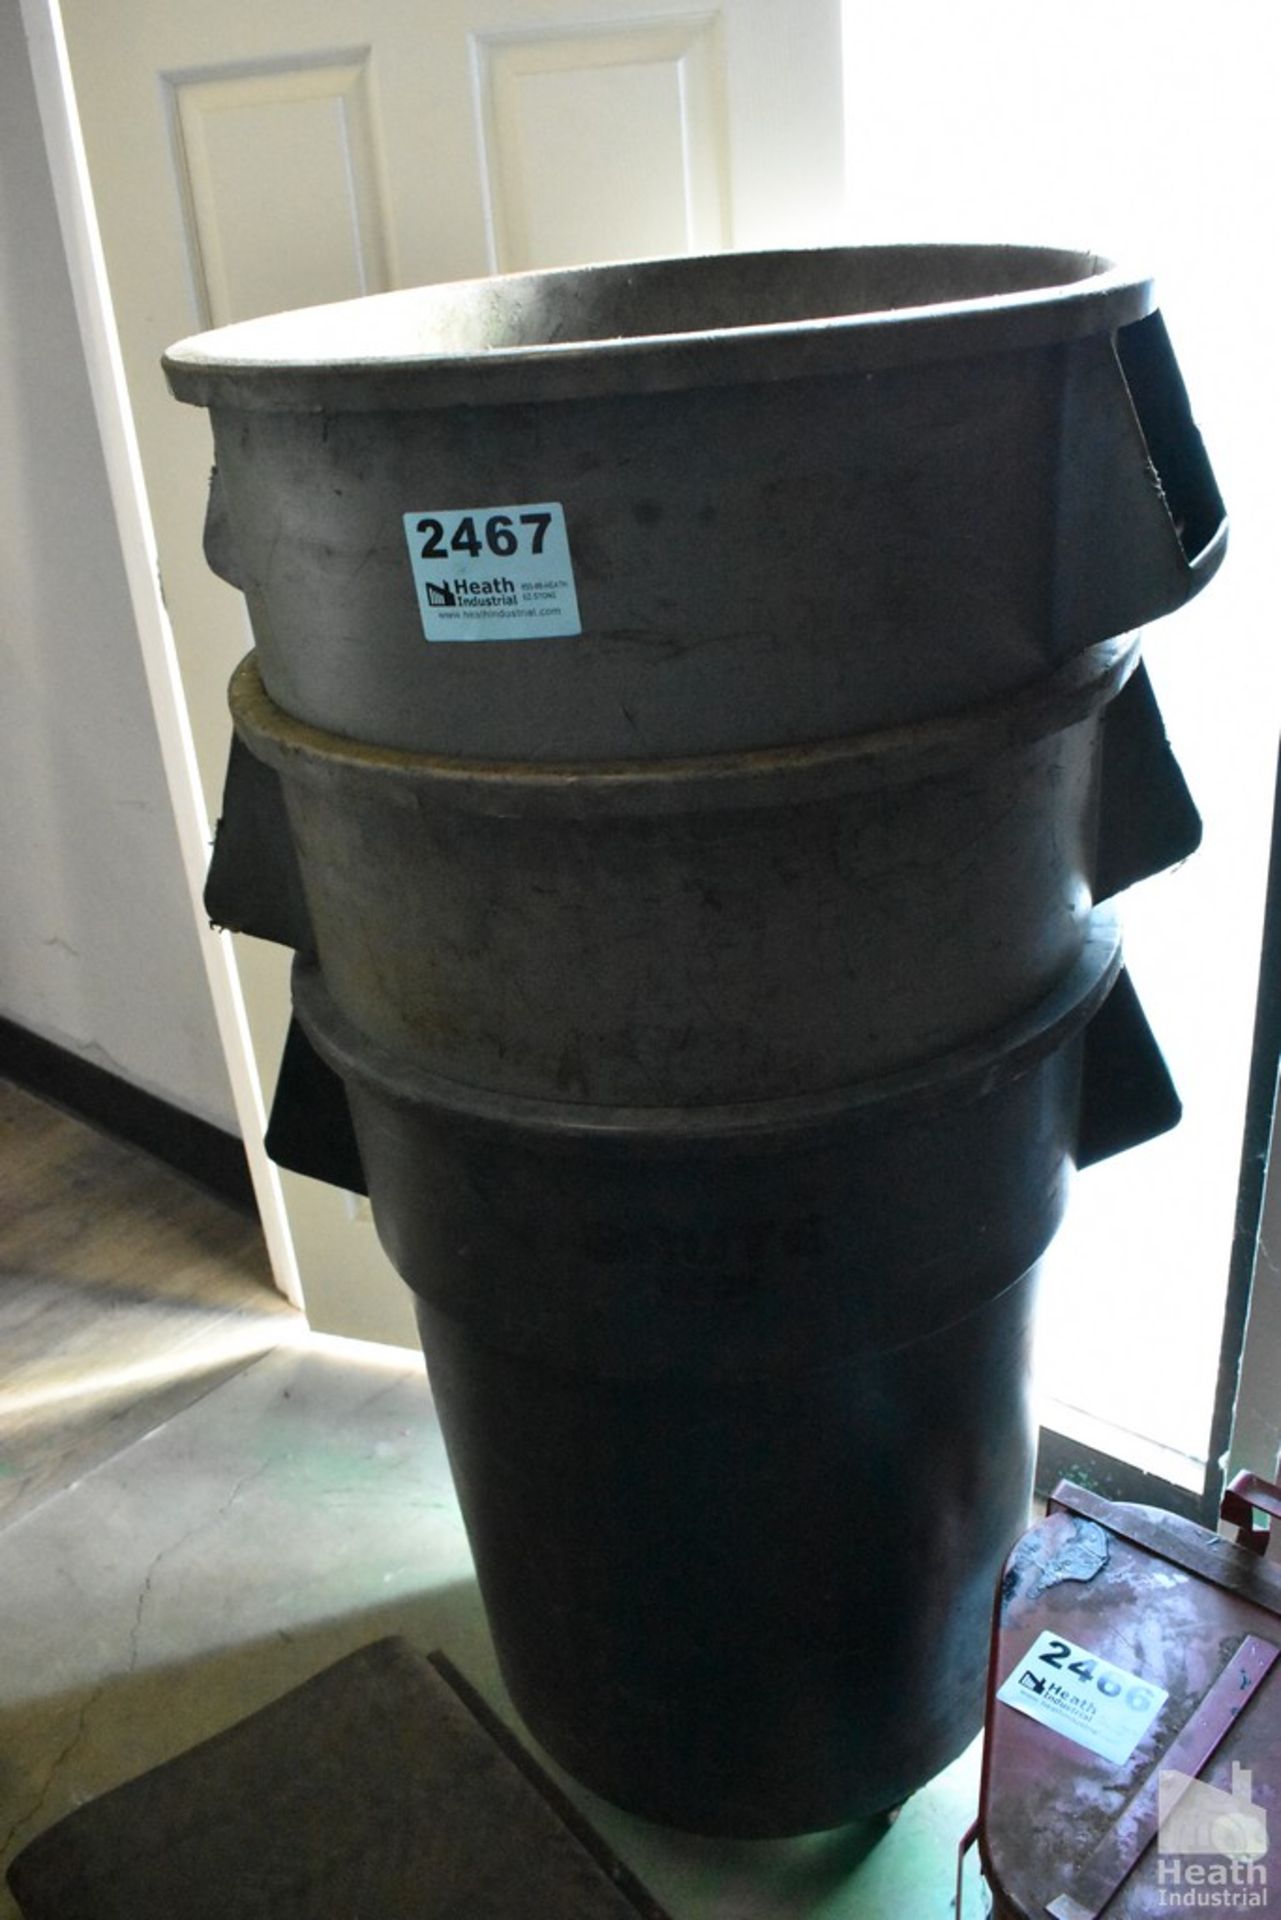 (3) 55-GAL WASTE BINS WITH (1) DOLLY